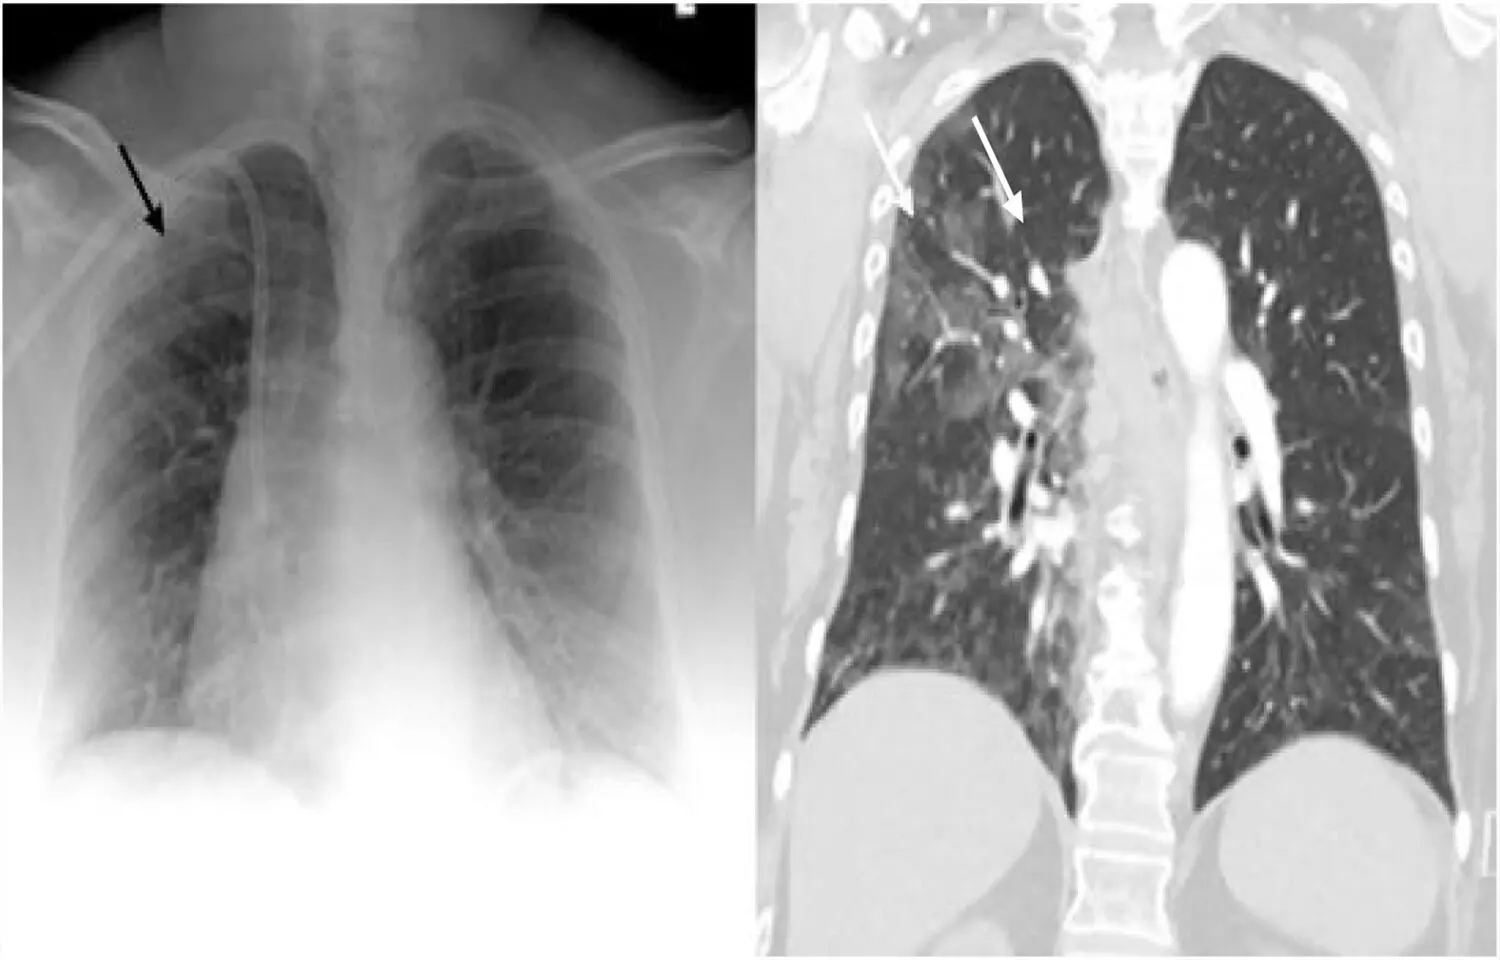 Projections on radiation dose tied to image quality during chest digital radiography: Study